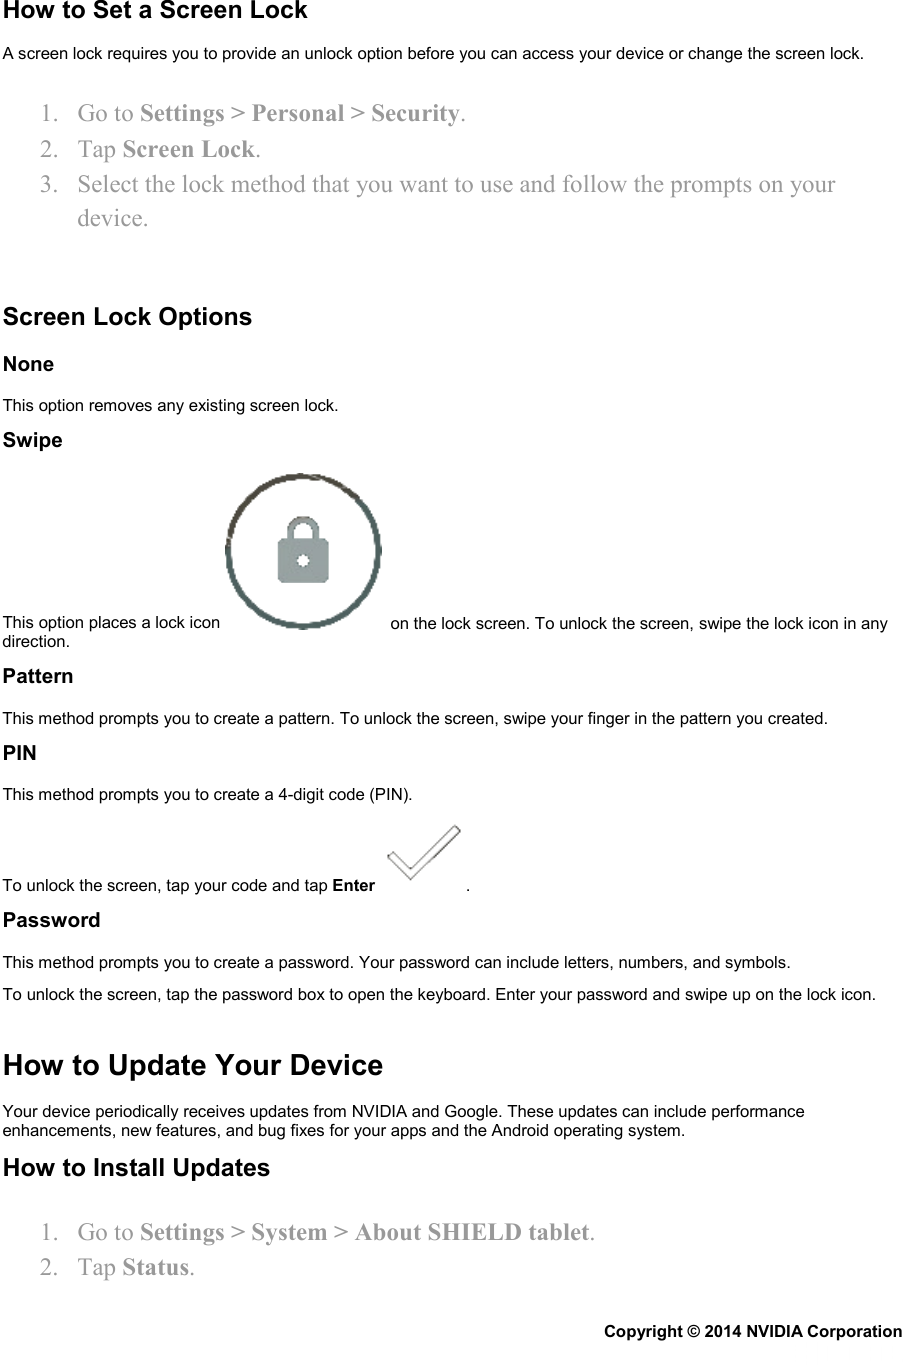 How to Set a Screen Lock A screen lock requires you to provide an unlock option before you can access your device or change the screen lock. 1. Go to Settings &gt; Personal &gt; Security. 2. Tap Screen Lock. 3. Select the lock method that you want to use and follow the prompts on your device.   Screen Lock Options None This option removes any existing screen lock. Swipe This option places a lock icon    on the lock screen. To unlock the screen, swipe the lock icon in any direction. Pattern This method prompts you to create a pattern. To unlock the screen, swipe your finger in the pattern you created. PIN This method prompts you to create a 4-digit code (PIN). To unlock the screen, tap your code and tap Enter  . Password This method prompts you to create a password. Your password can include letters, numbers, and symbols. To unlock the screen, tap the password box to open the keyboard. Enter your password and swipe up on the lock icon.   How to Update Your Device Your device periodically receives updates from NVIDIA and Google. These updates can include performance enhancements, new features, and bug fixes for your apps and the Android operating system. How to Install Updates 1. Go to Settings &gt; System &gt; About SHIELD tablet.  2. Tap Status. Copyright © 2014 NVIDIA Corporation   